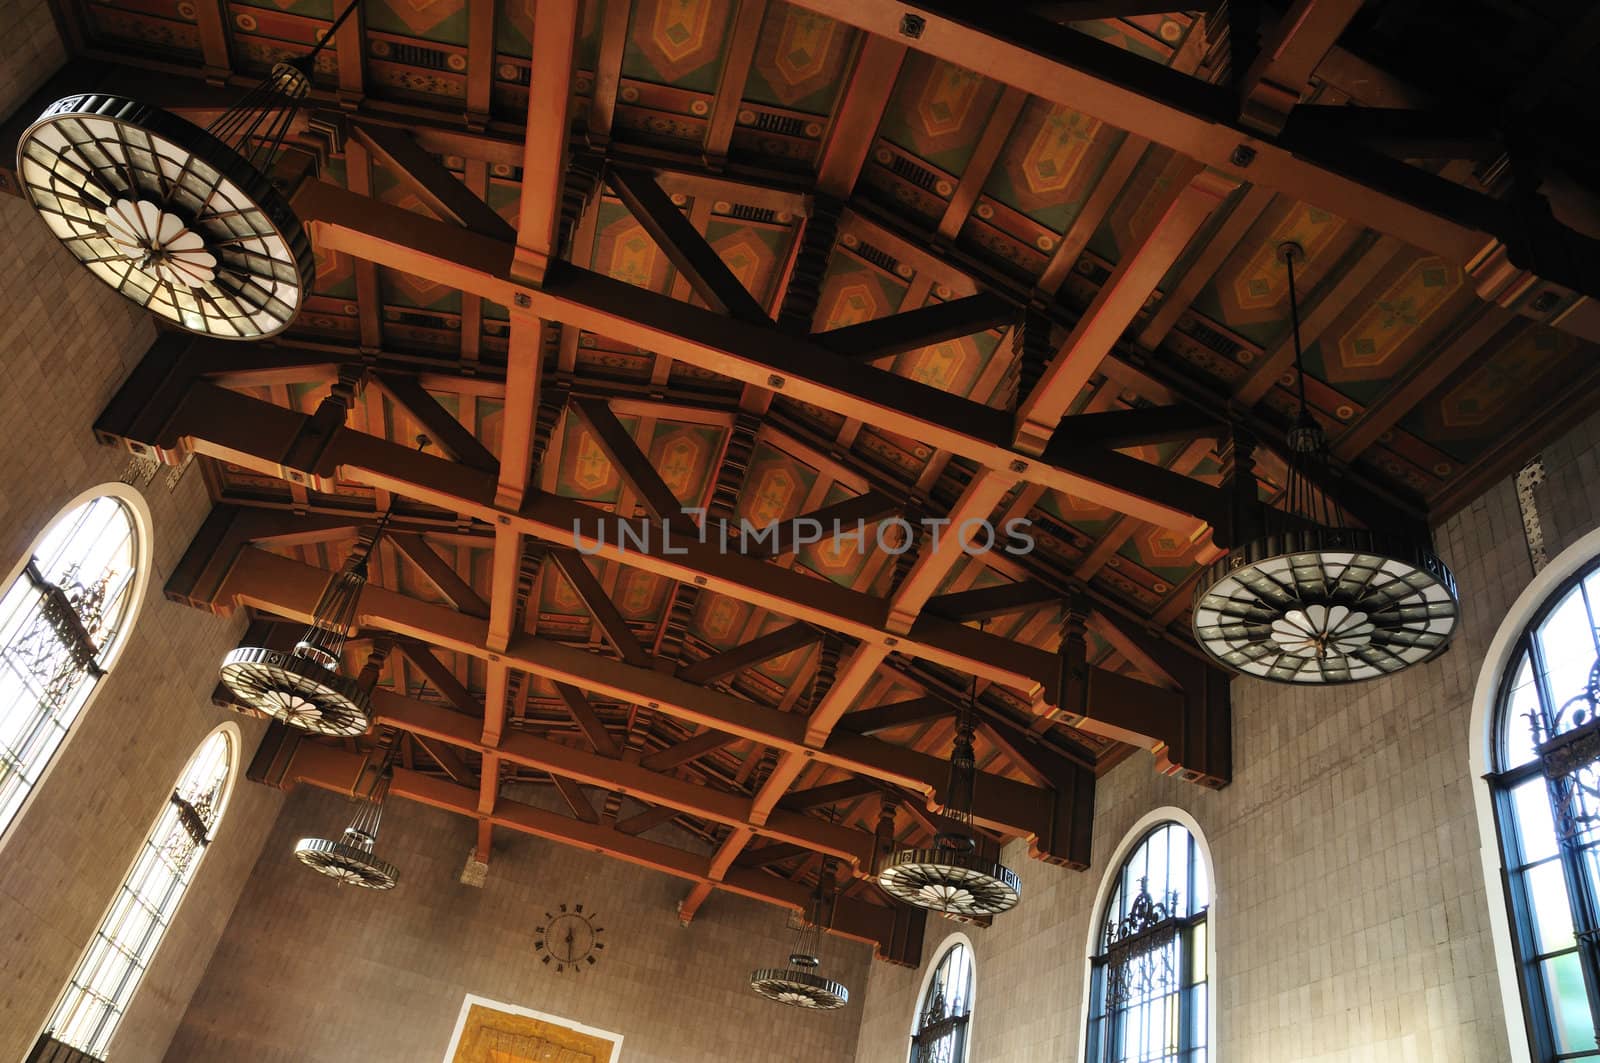 Painted beam ceiling in a Los Angeles train station